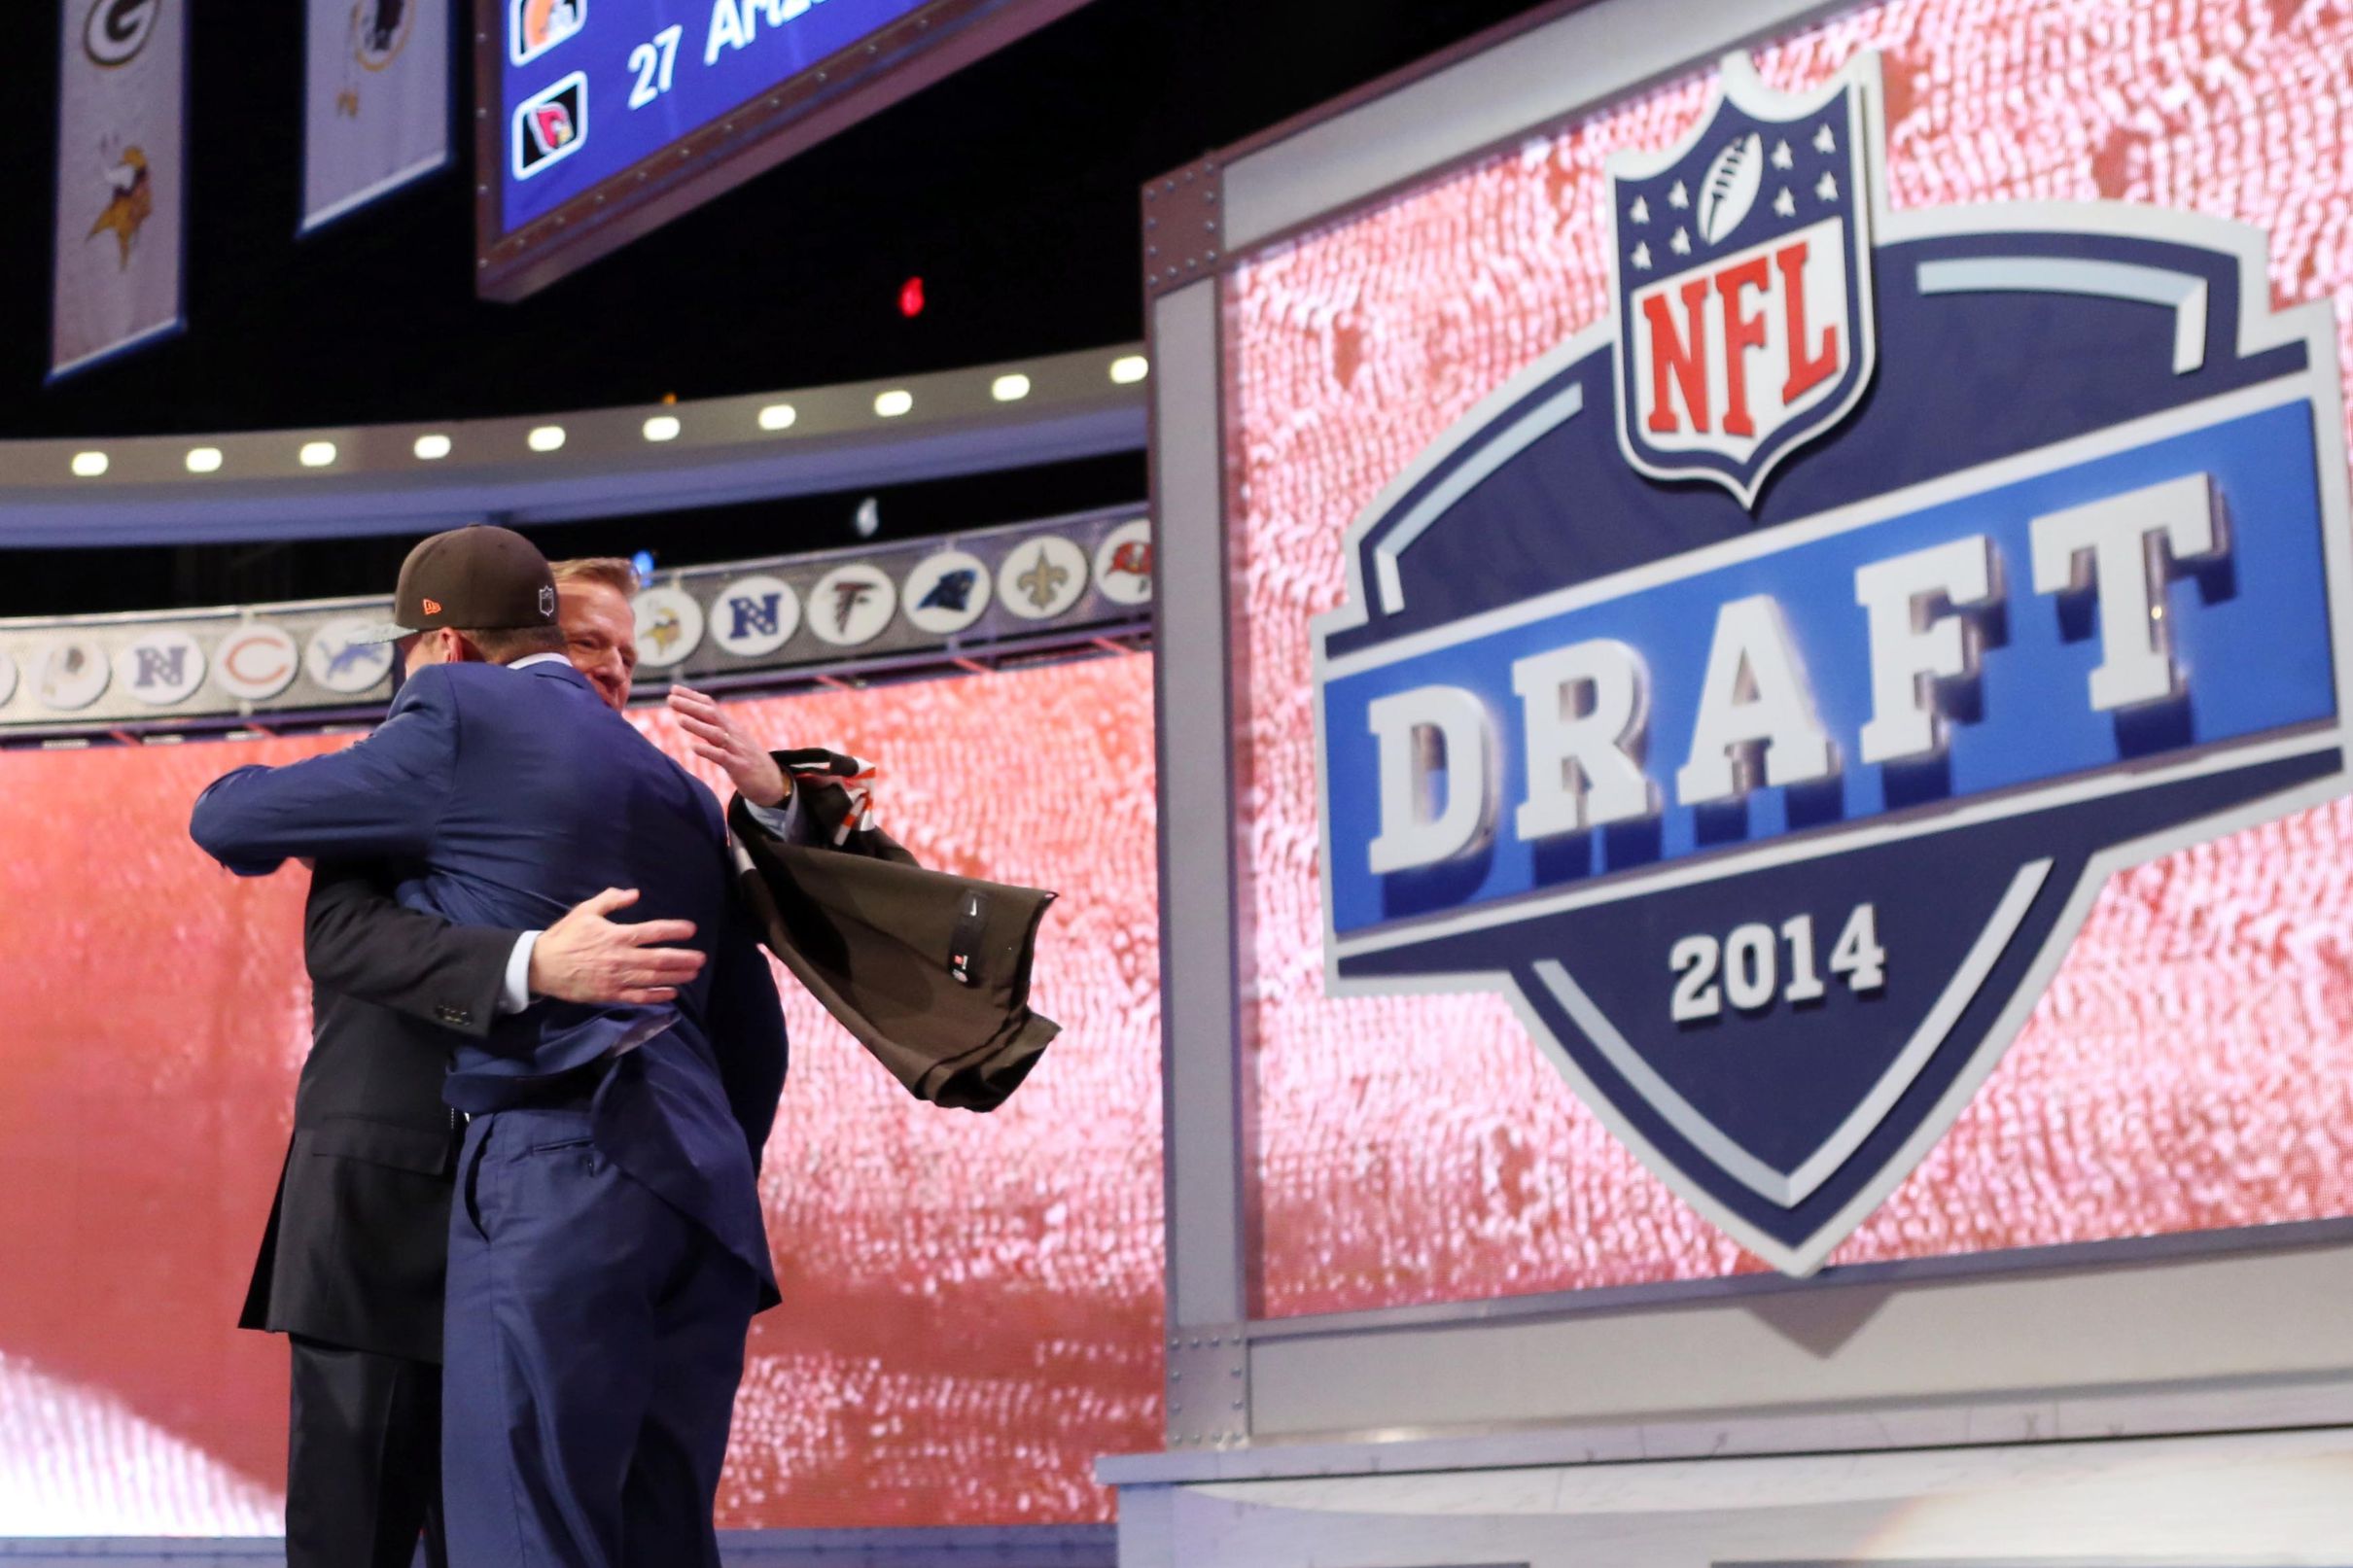 2014 NFL Draft Coverage - One Foot Down